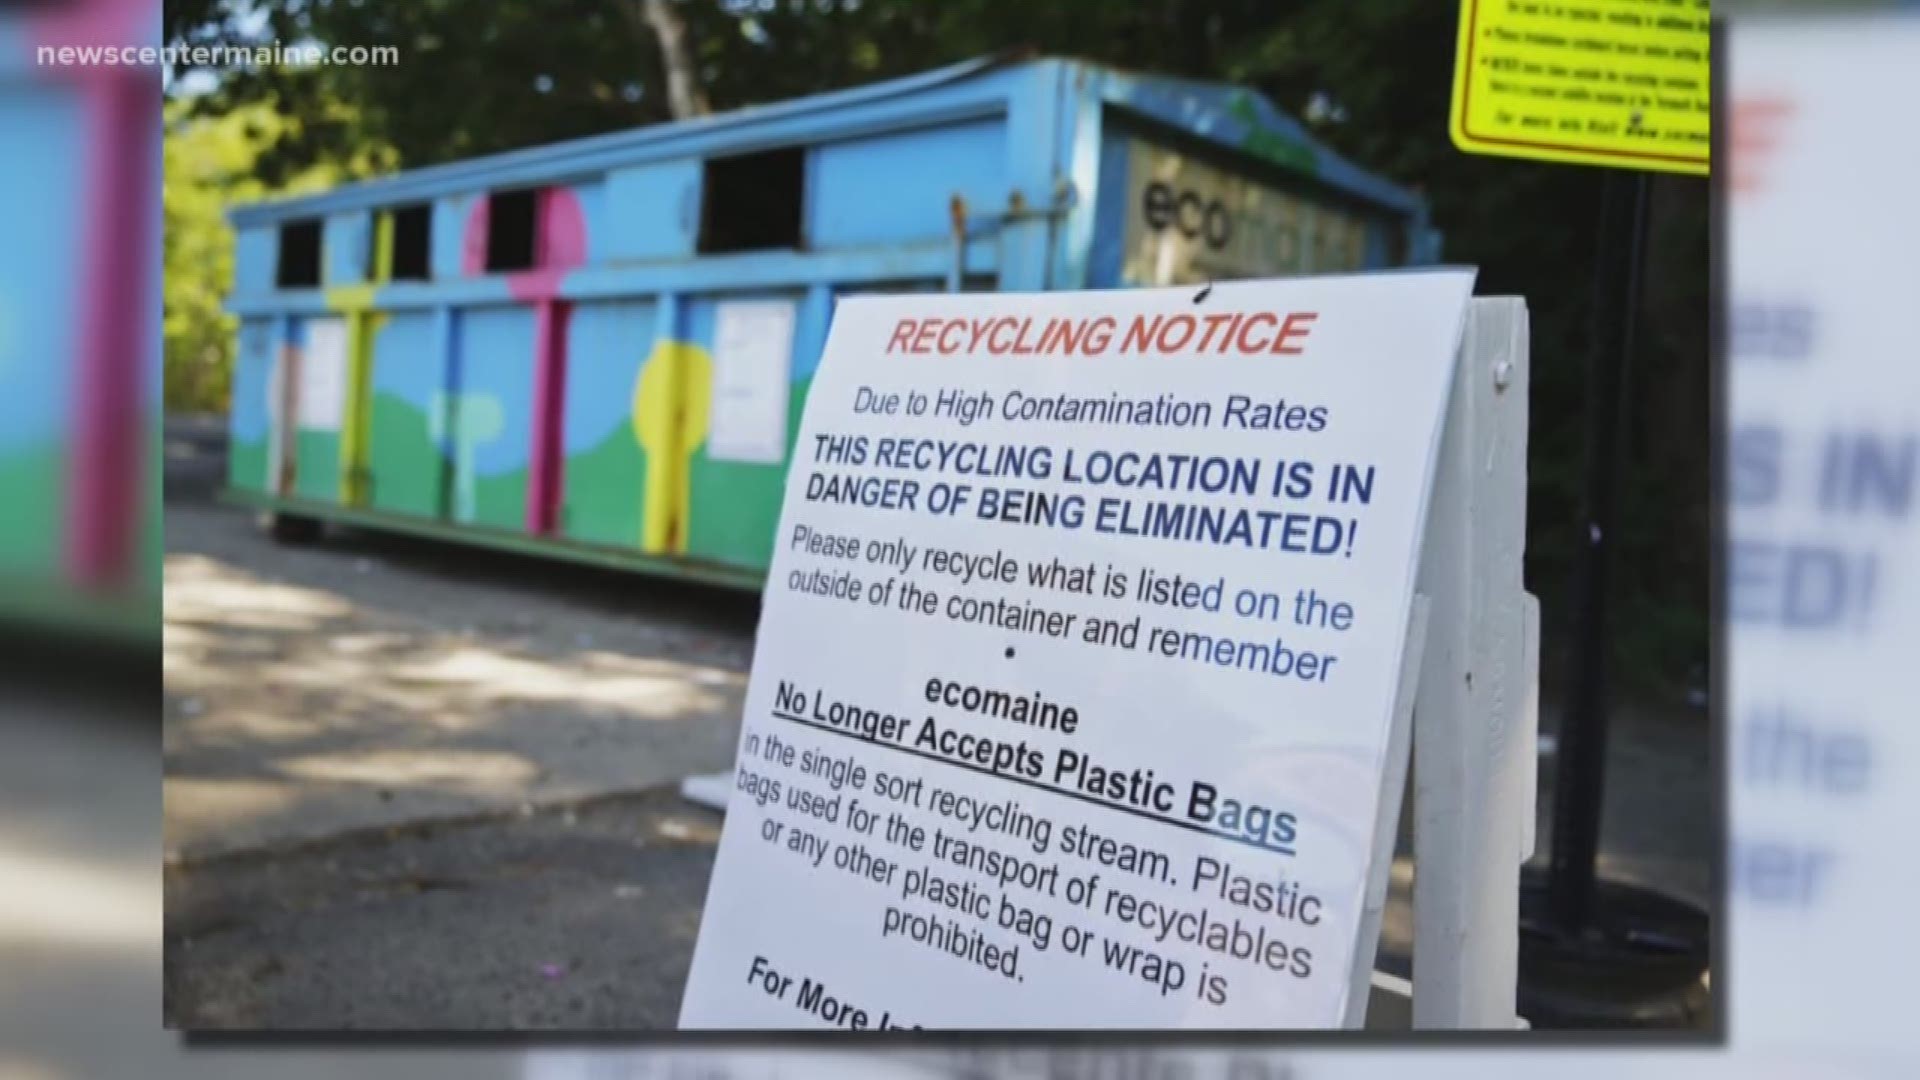 Ecomaine recycling in jeopardy